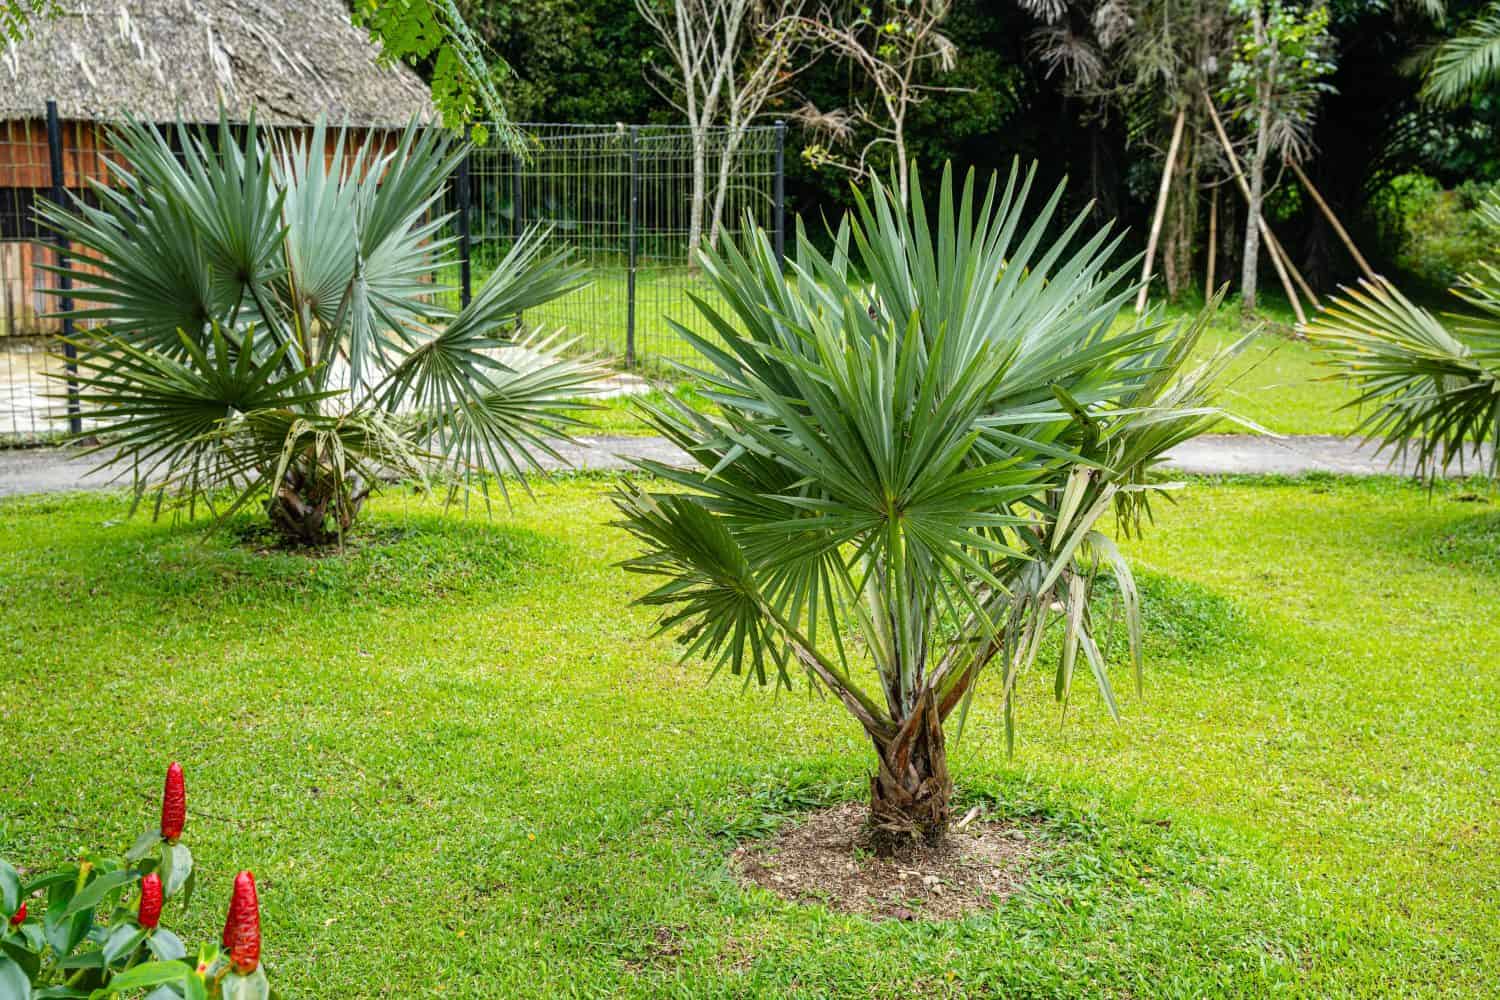 Brahea armata, commonly known as Mexican blue palm or blue hesper palm, is a large evergreen tree of the palm family Arecaceae.